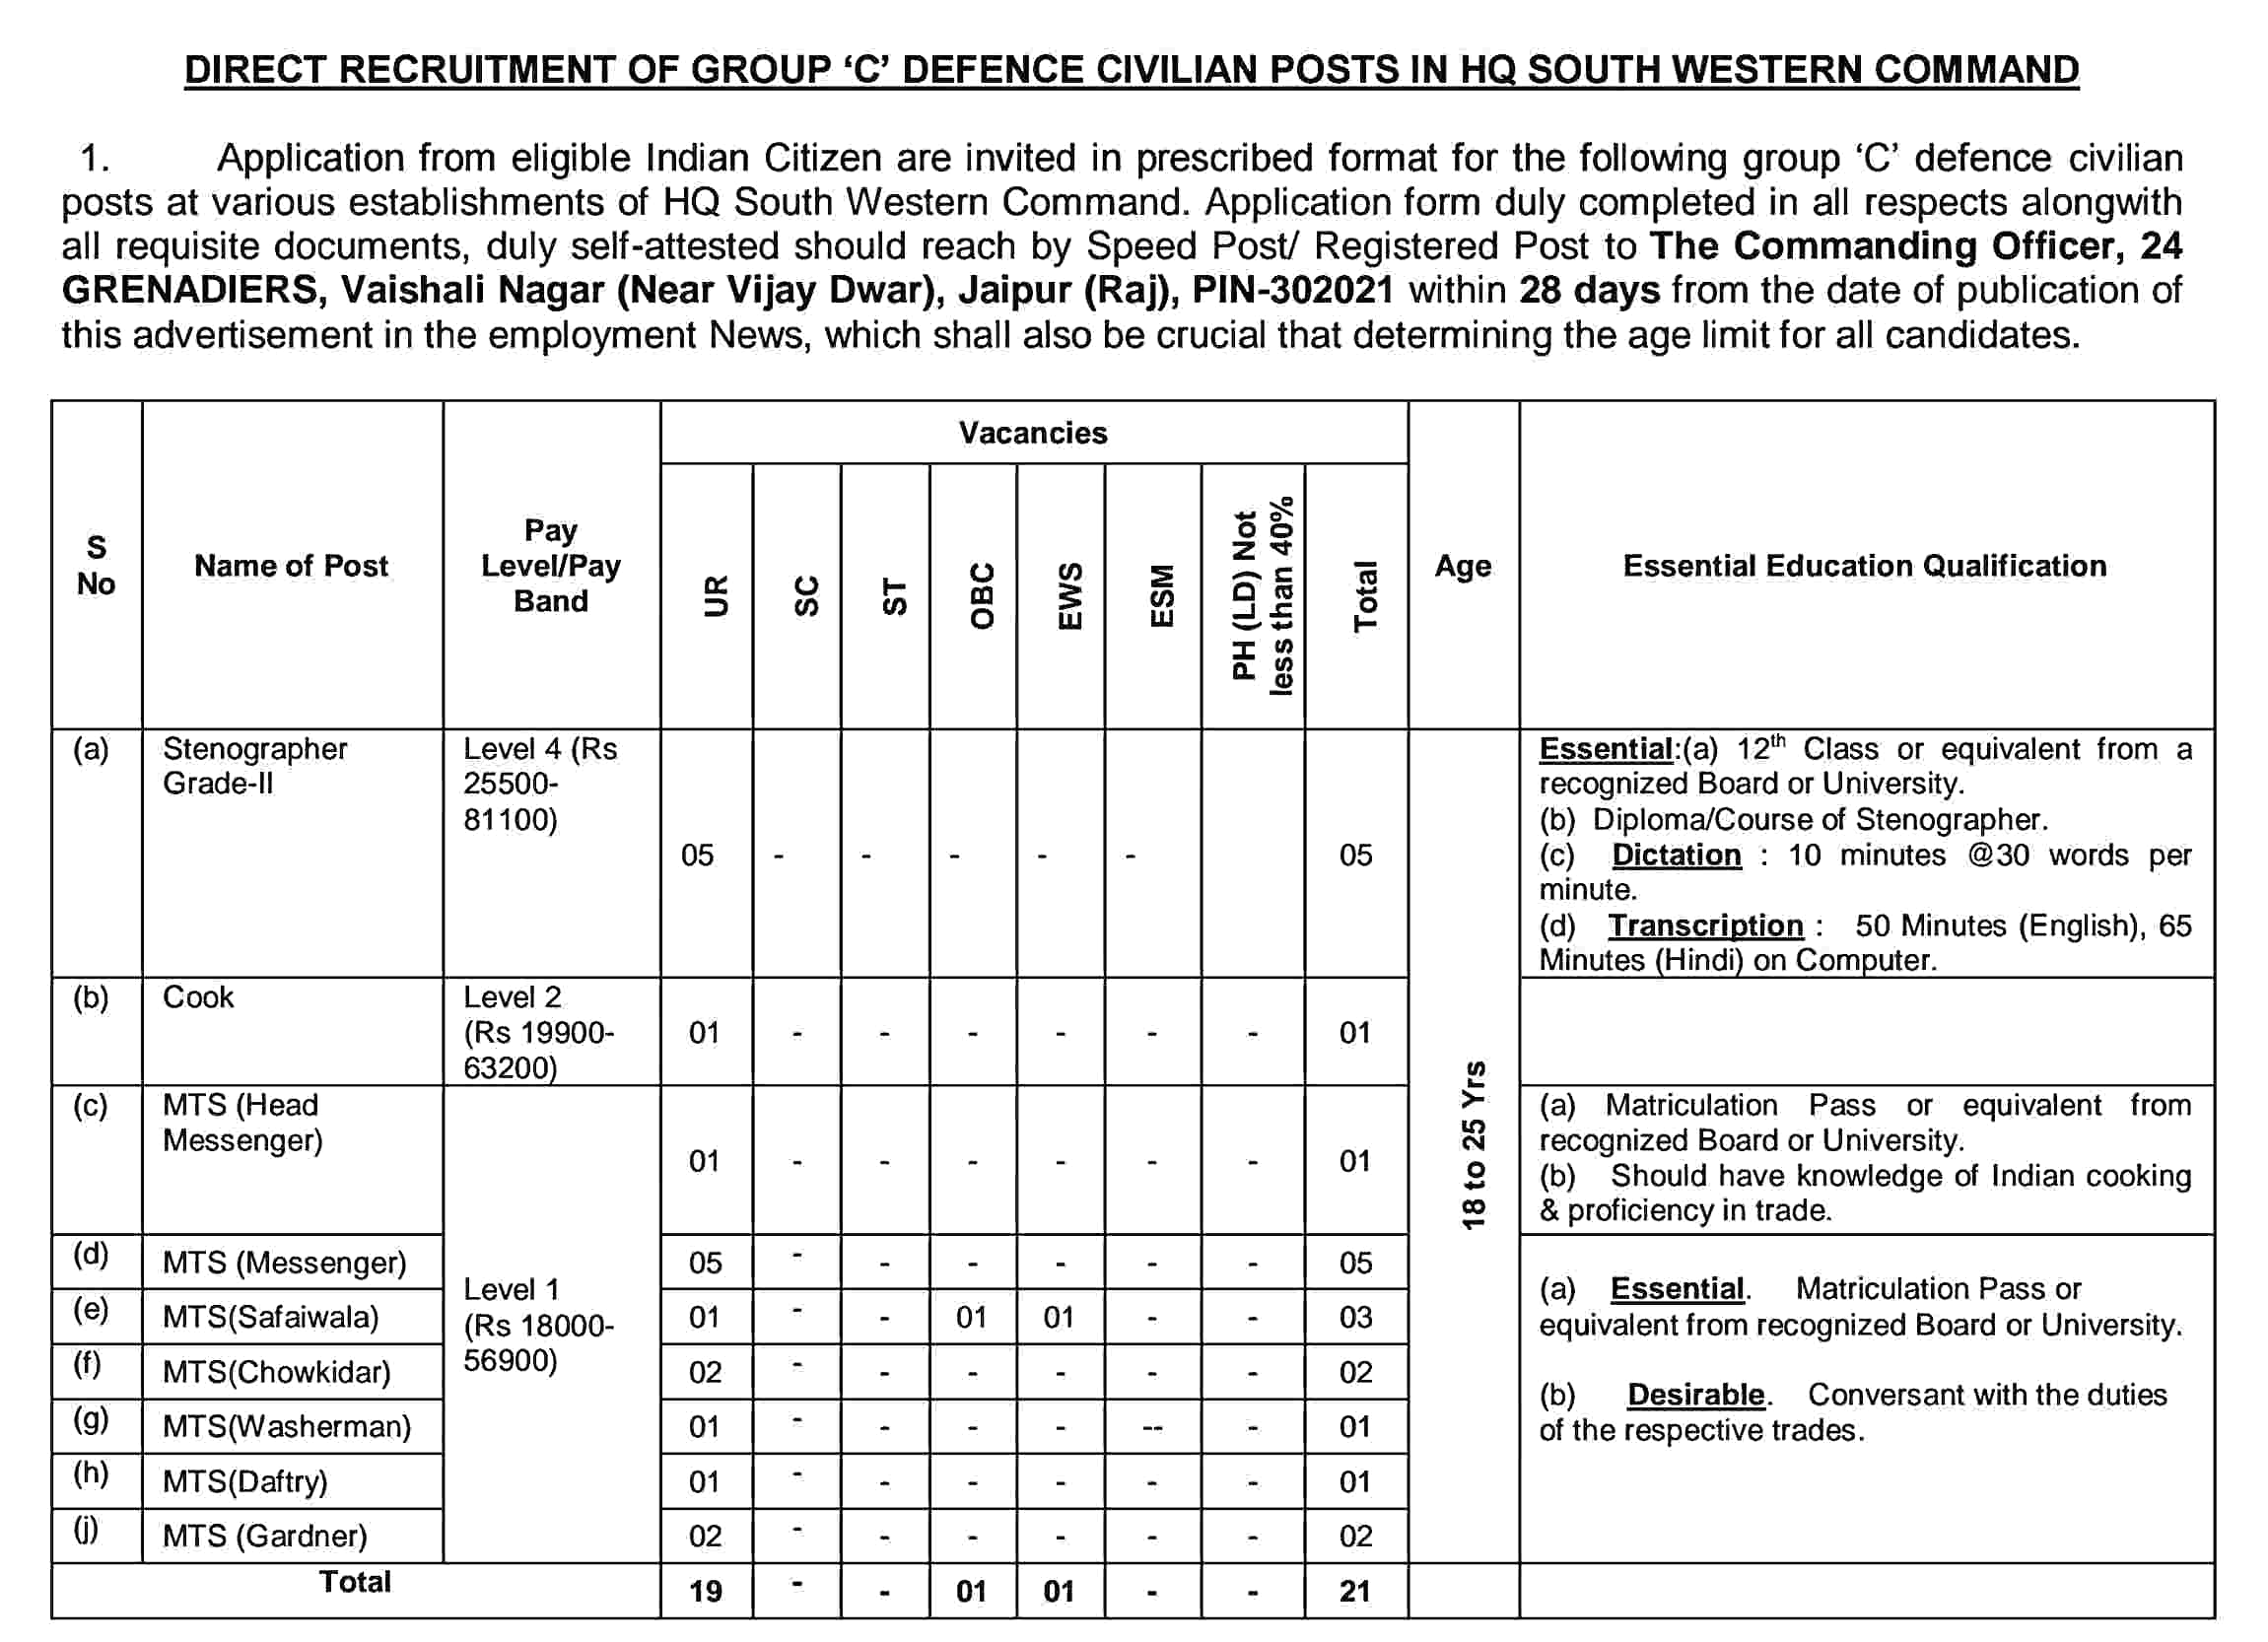 Army HQ South Western Command Recruitment 2023